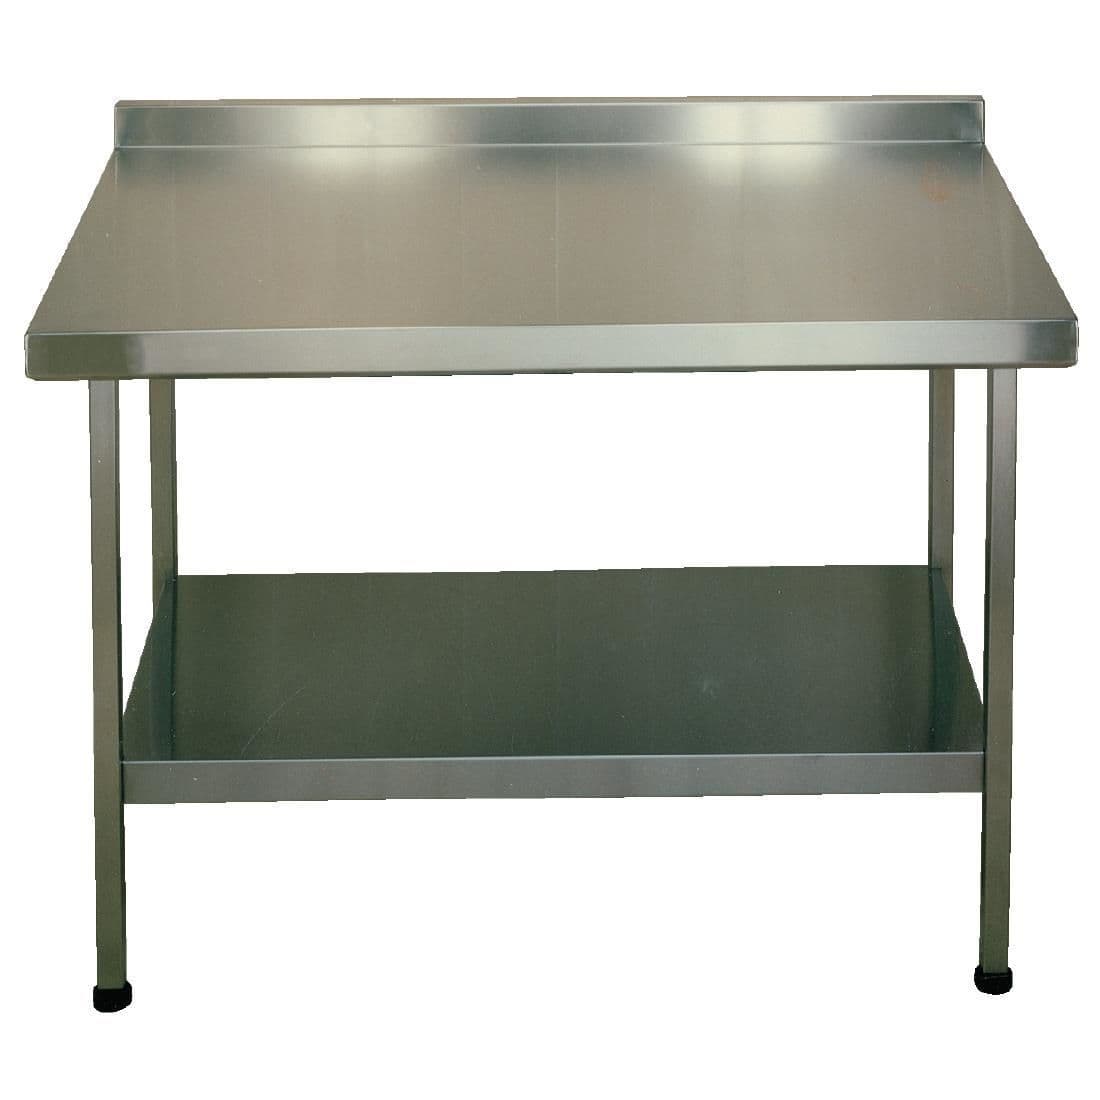 Franke Sissons Stainless Steel Wall Table with Upstand 600x650mm JD Catering Equipment Solutions Ltd